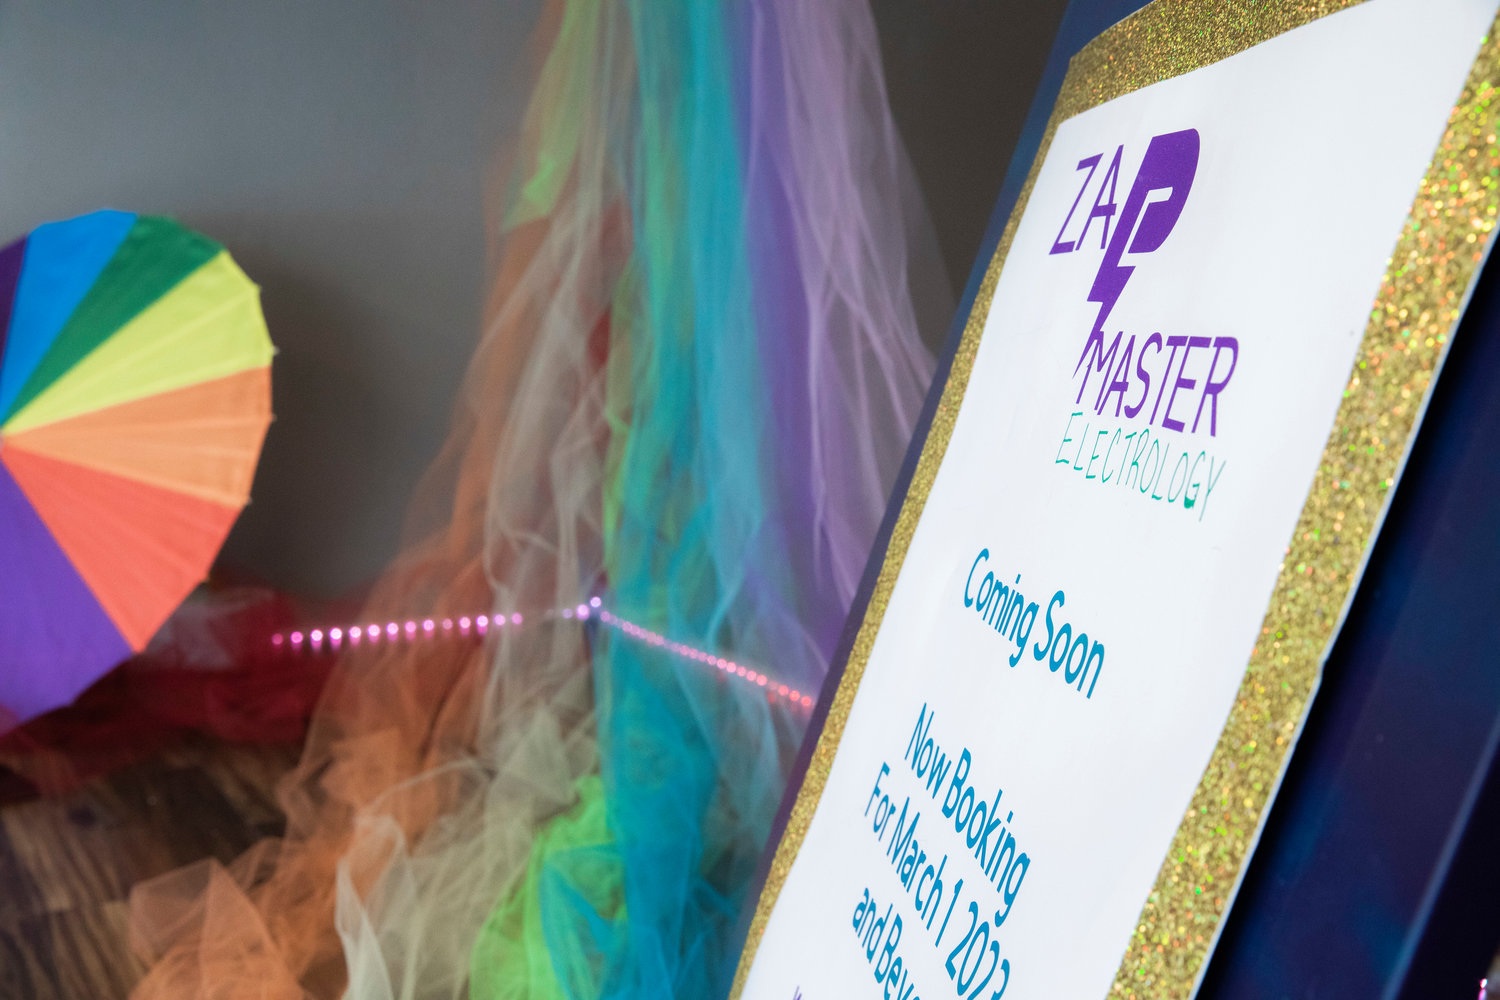 Zap Master Electrology, located at 108 North Tower Avenue in Centralia, is now booking for the month of March.